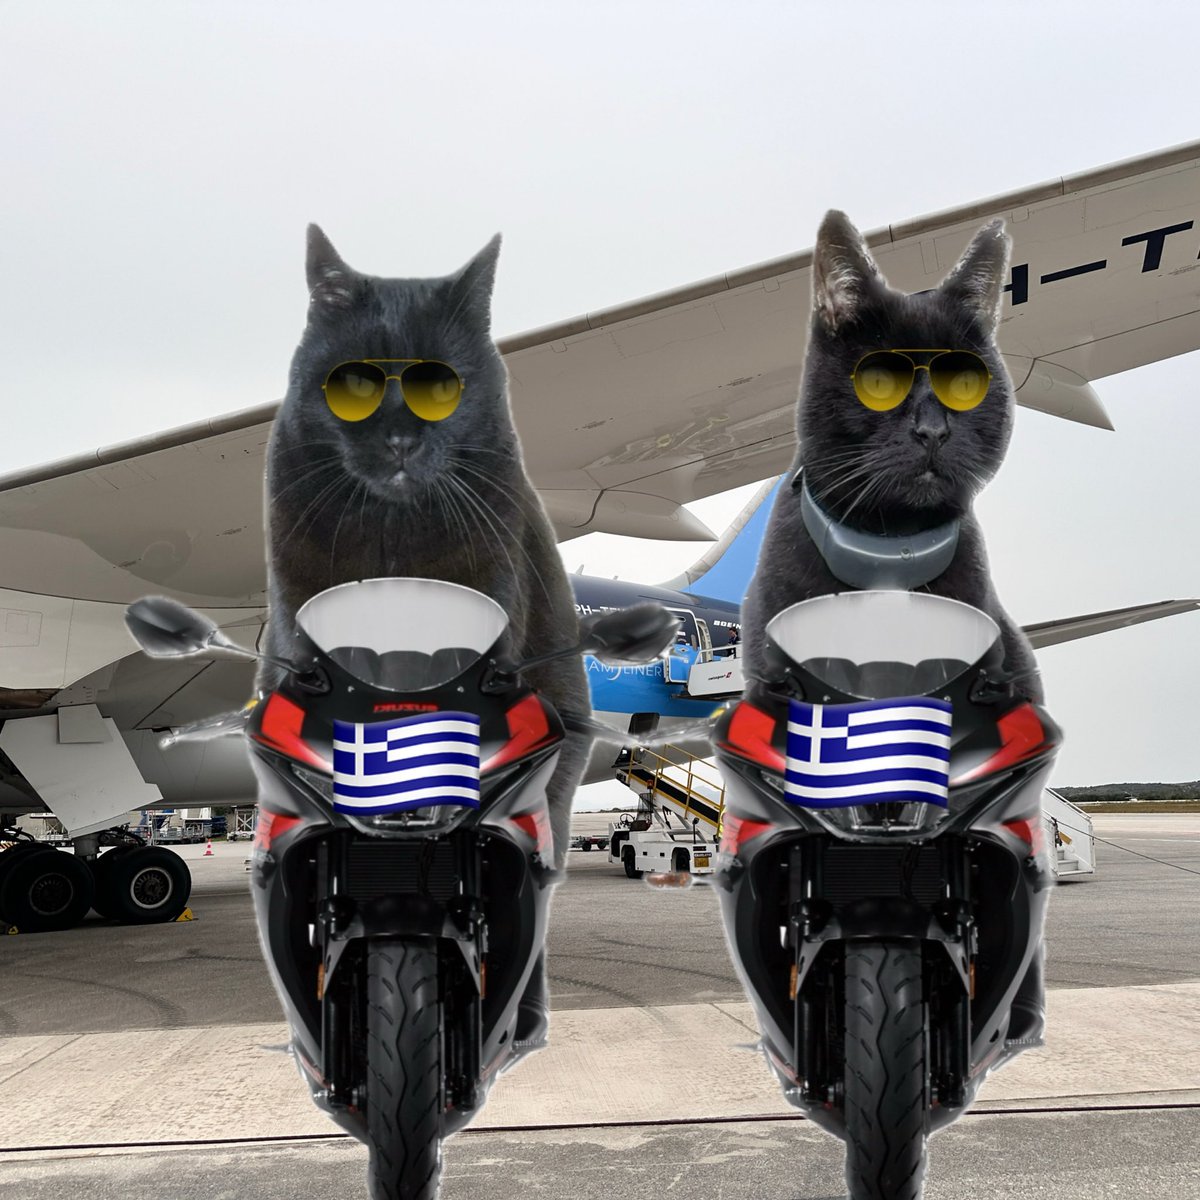 #Hedgewatch #theruffriderz #TwoGreekBrothers #PostcardFromKos @MunchPudding 💙🇬🇷💙This is where we started yesterday! This is the plane that brought Mánkas’s mums to Kos. They haven’t a clou we are here too! Meow!😹